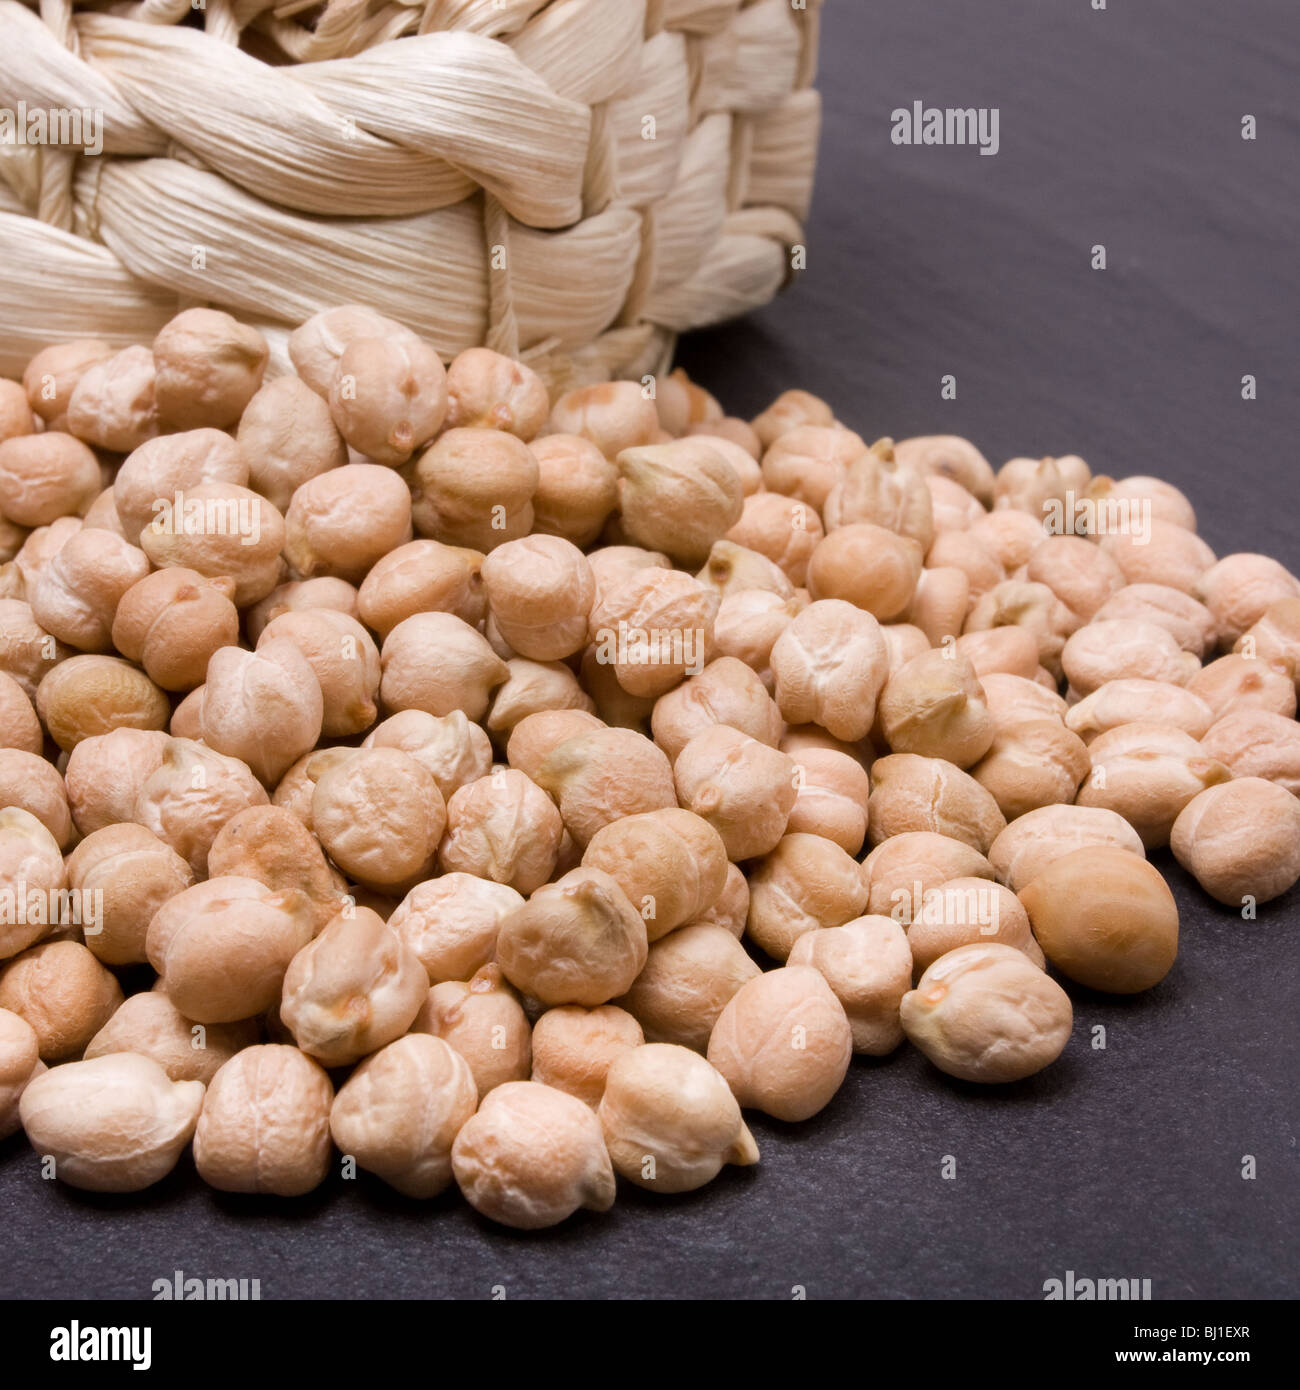 Dried chick peas overflowing from wicker basket against dark slate background. Stock Photo